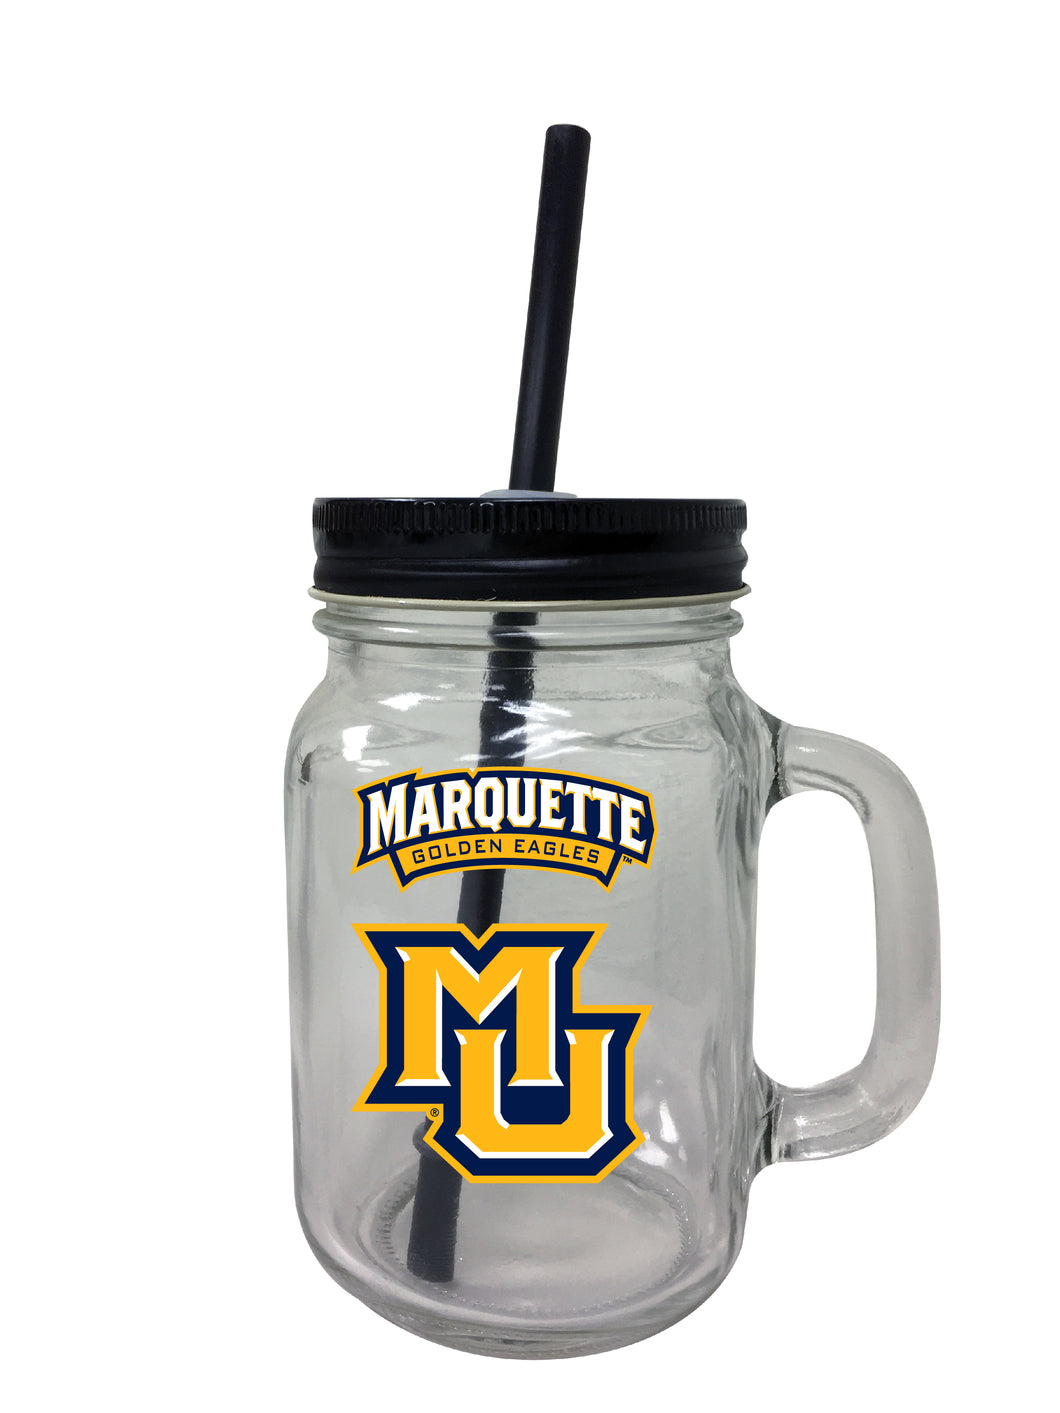 Marquette Golden Eagles NCAA Iconic Mason Jar Glass - Officially Licensed Collegiate Drinkware with Lid and Straw 2-Pack